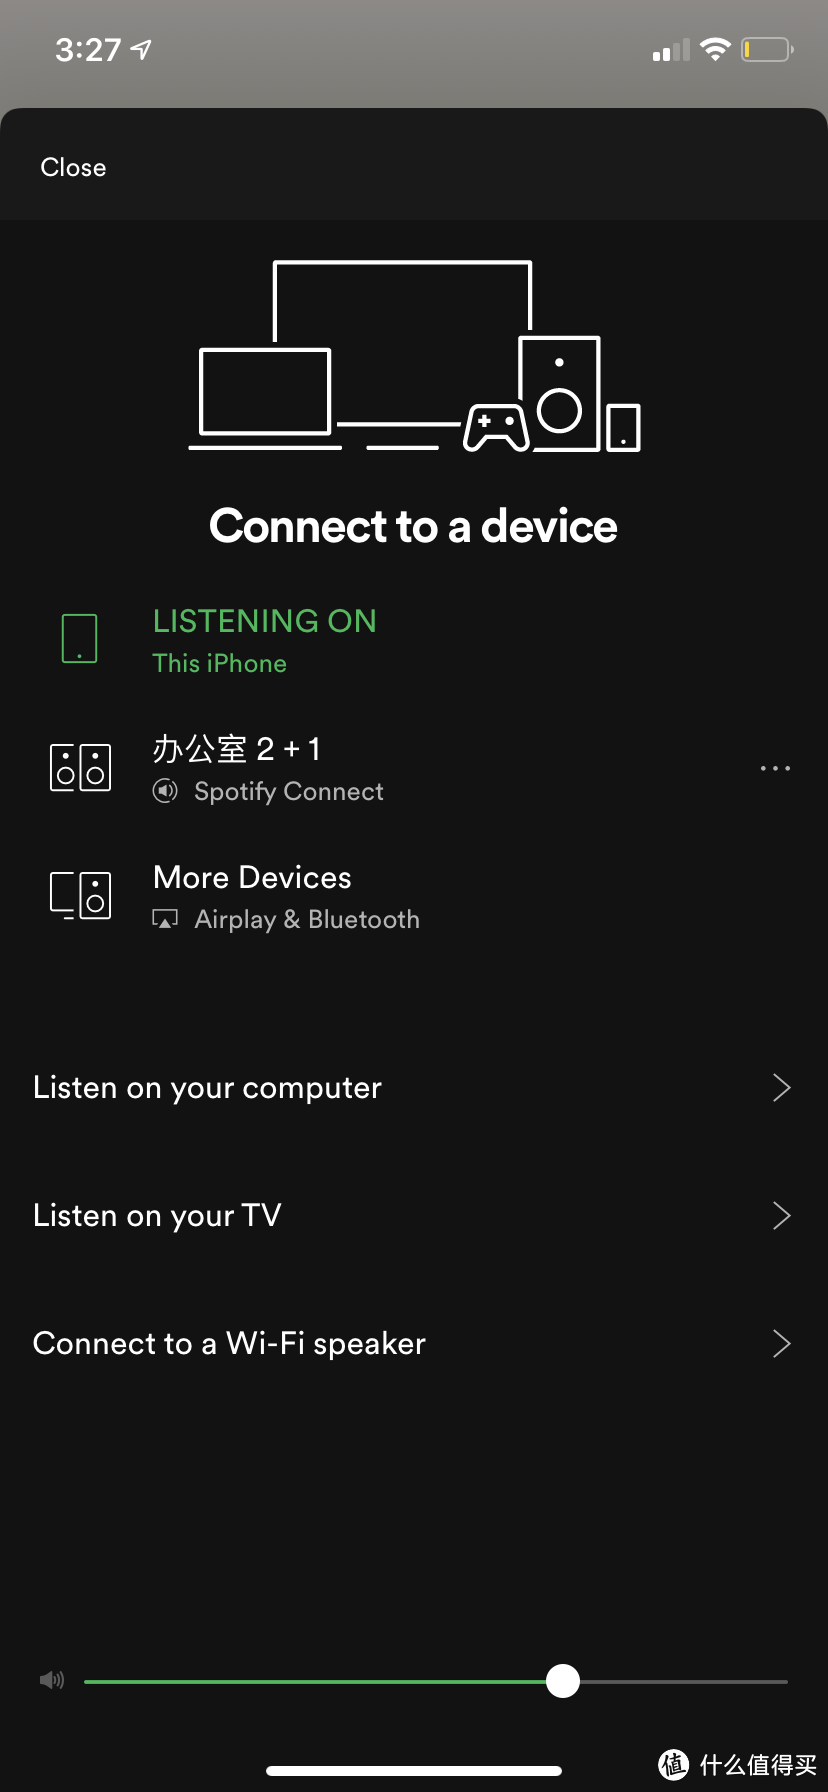 Connect to a device